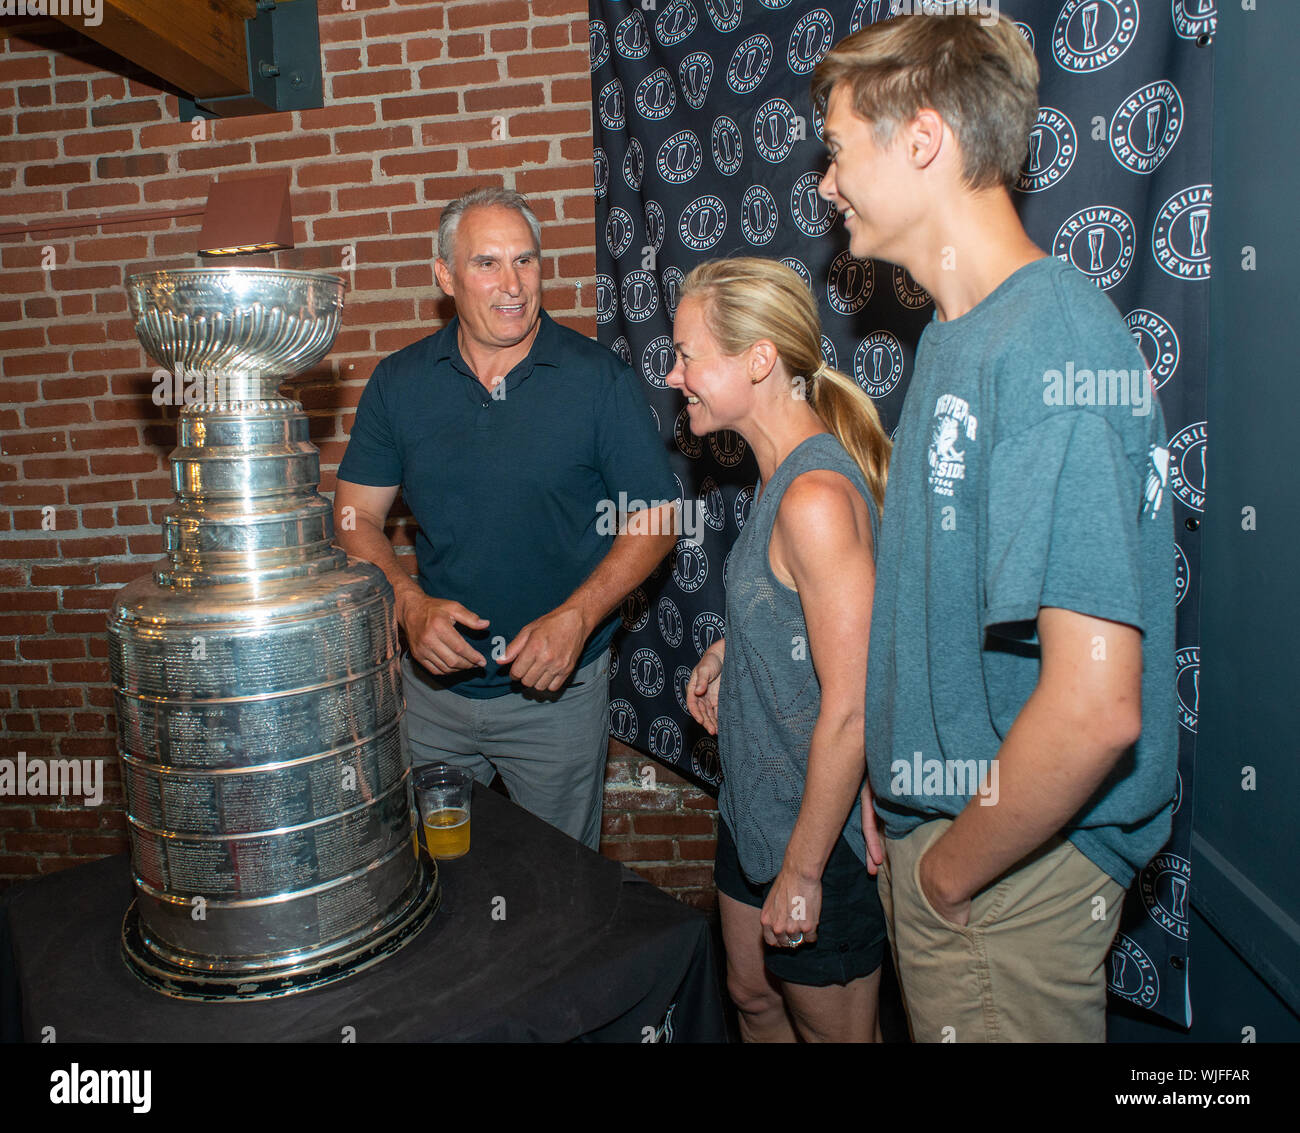 https://c8.alamy.com/comp/WJFFAR/from-left-stanley-cup-champion-st-louis-blues-head-coach-craig-berube-poses-for-a-photo-with-laura-viehweger-and-ryan-viehweger-as-he-showed-off-the-WJFFAR.jpg